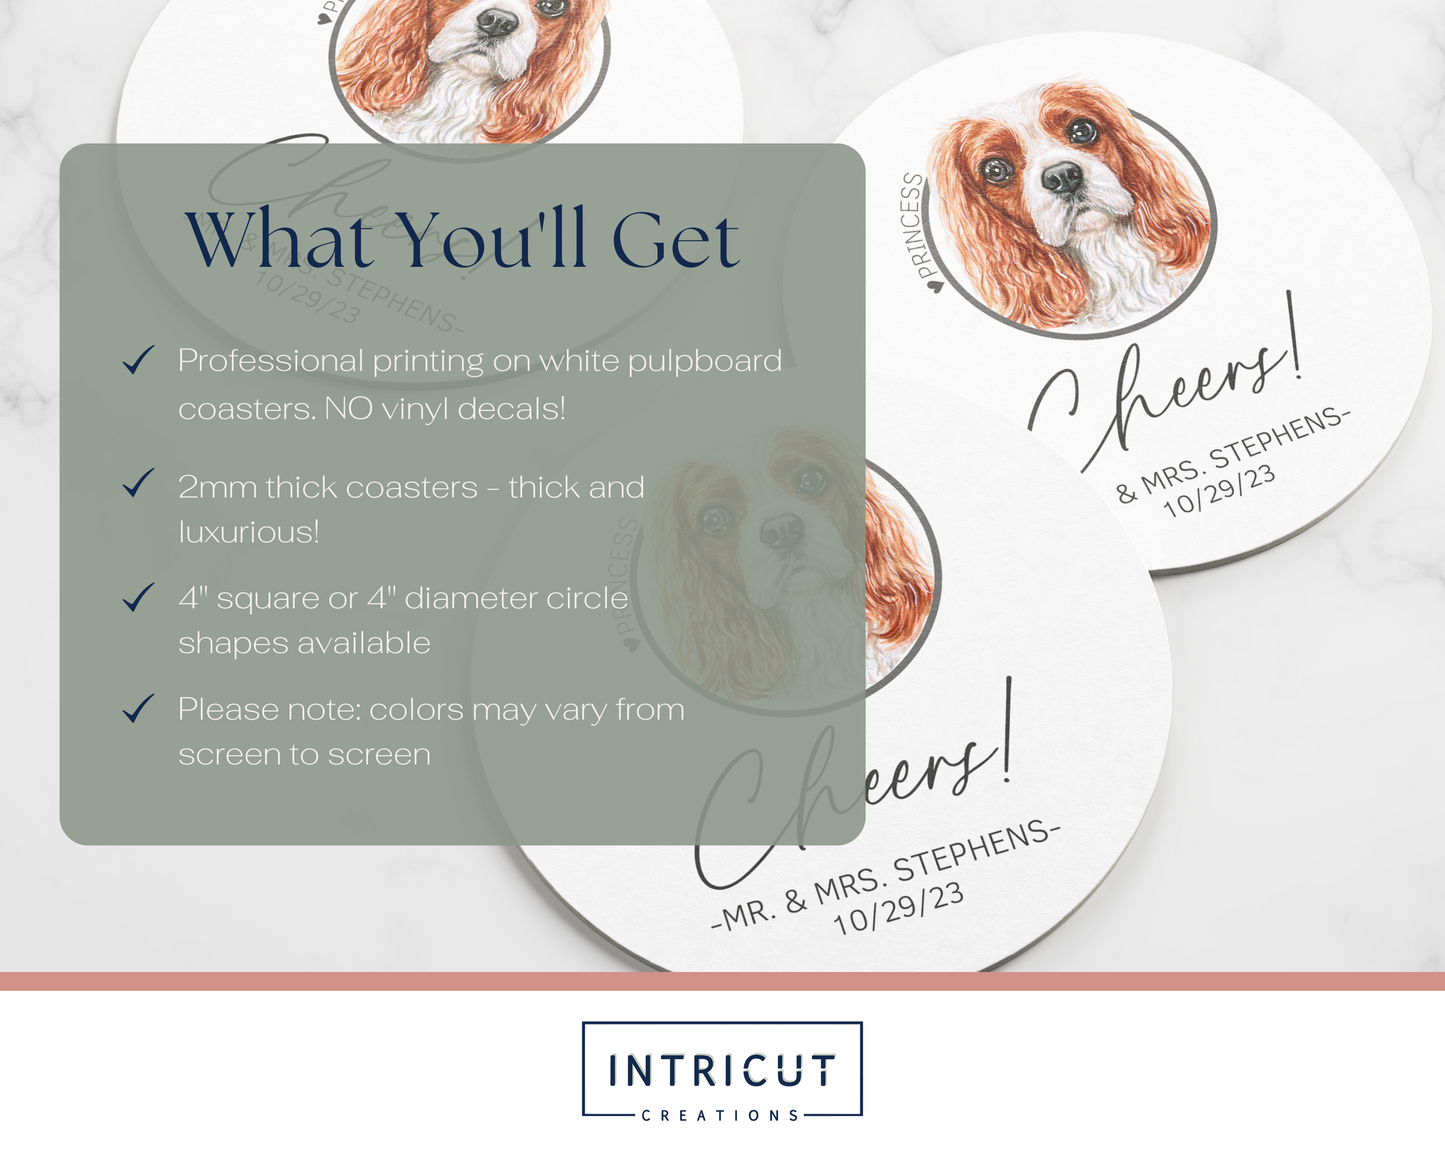 what you'll get: professional color printed pulpboard coasters, 4'' square or circle options available, please note, colors may vary from screen to screen